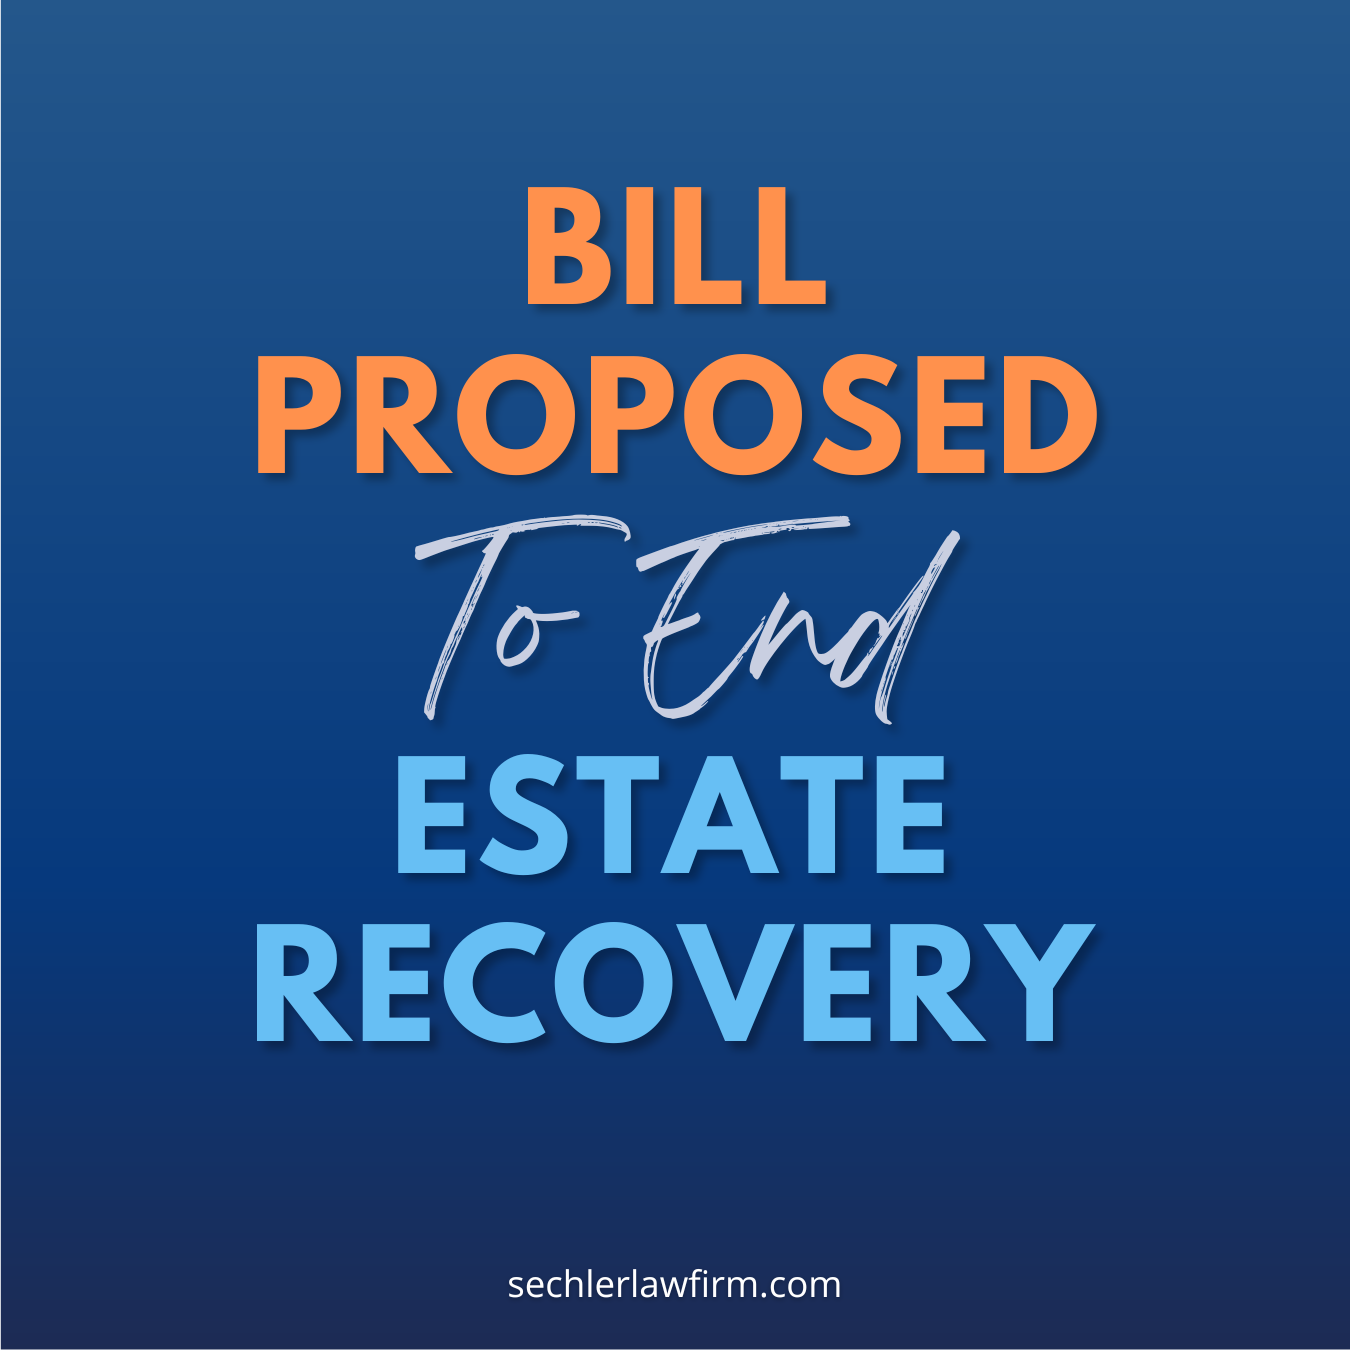 Bill Proposed to End Estate Recovery